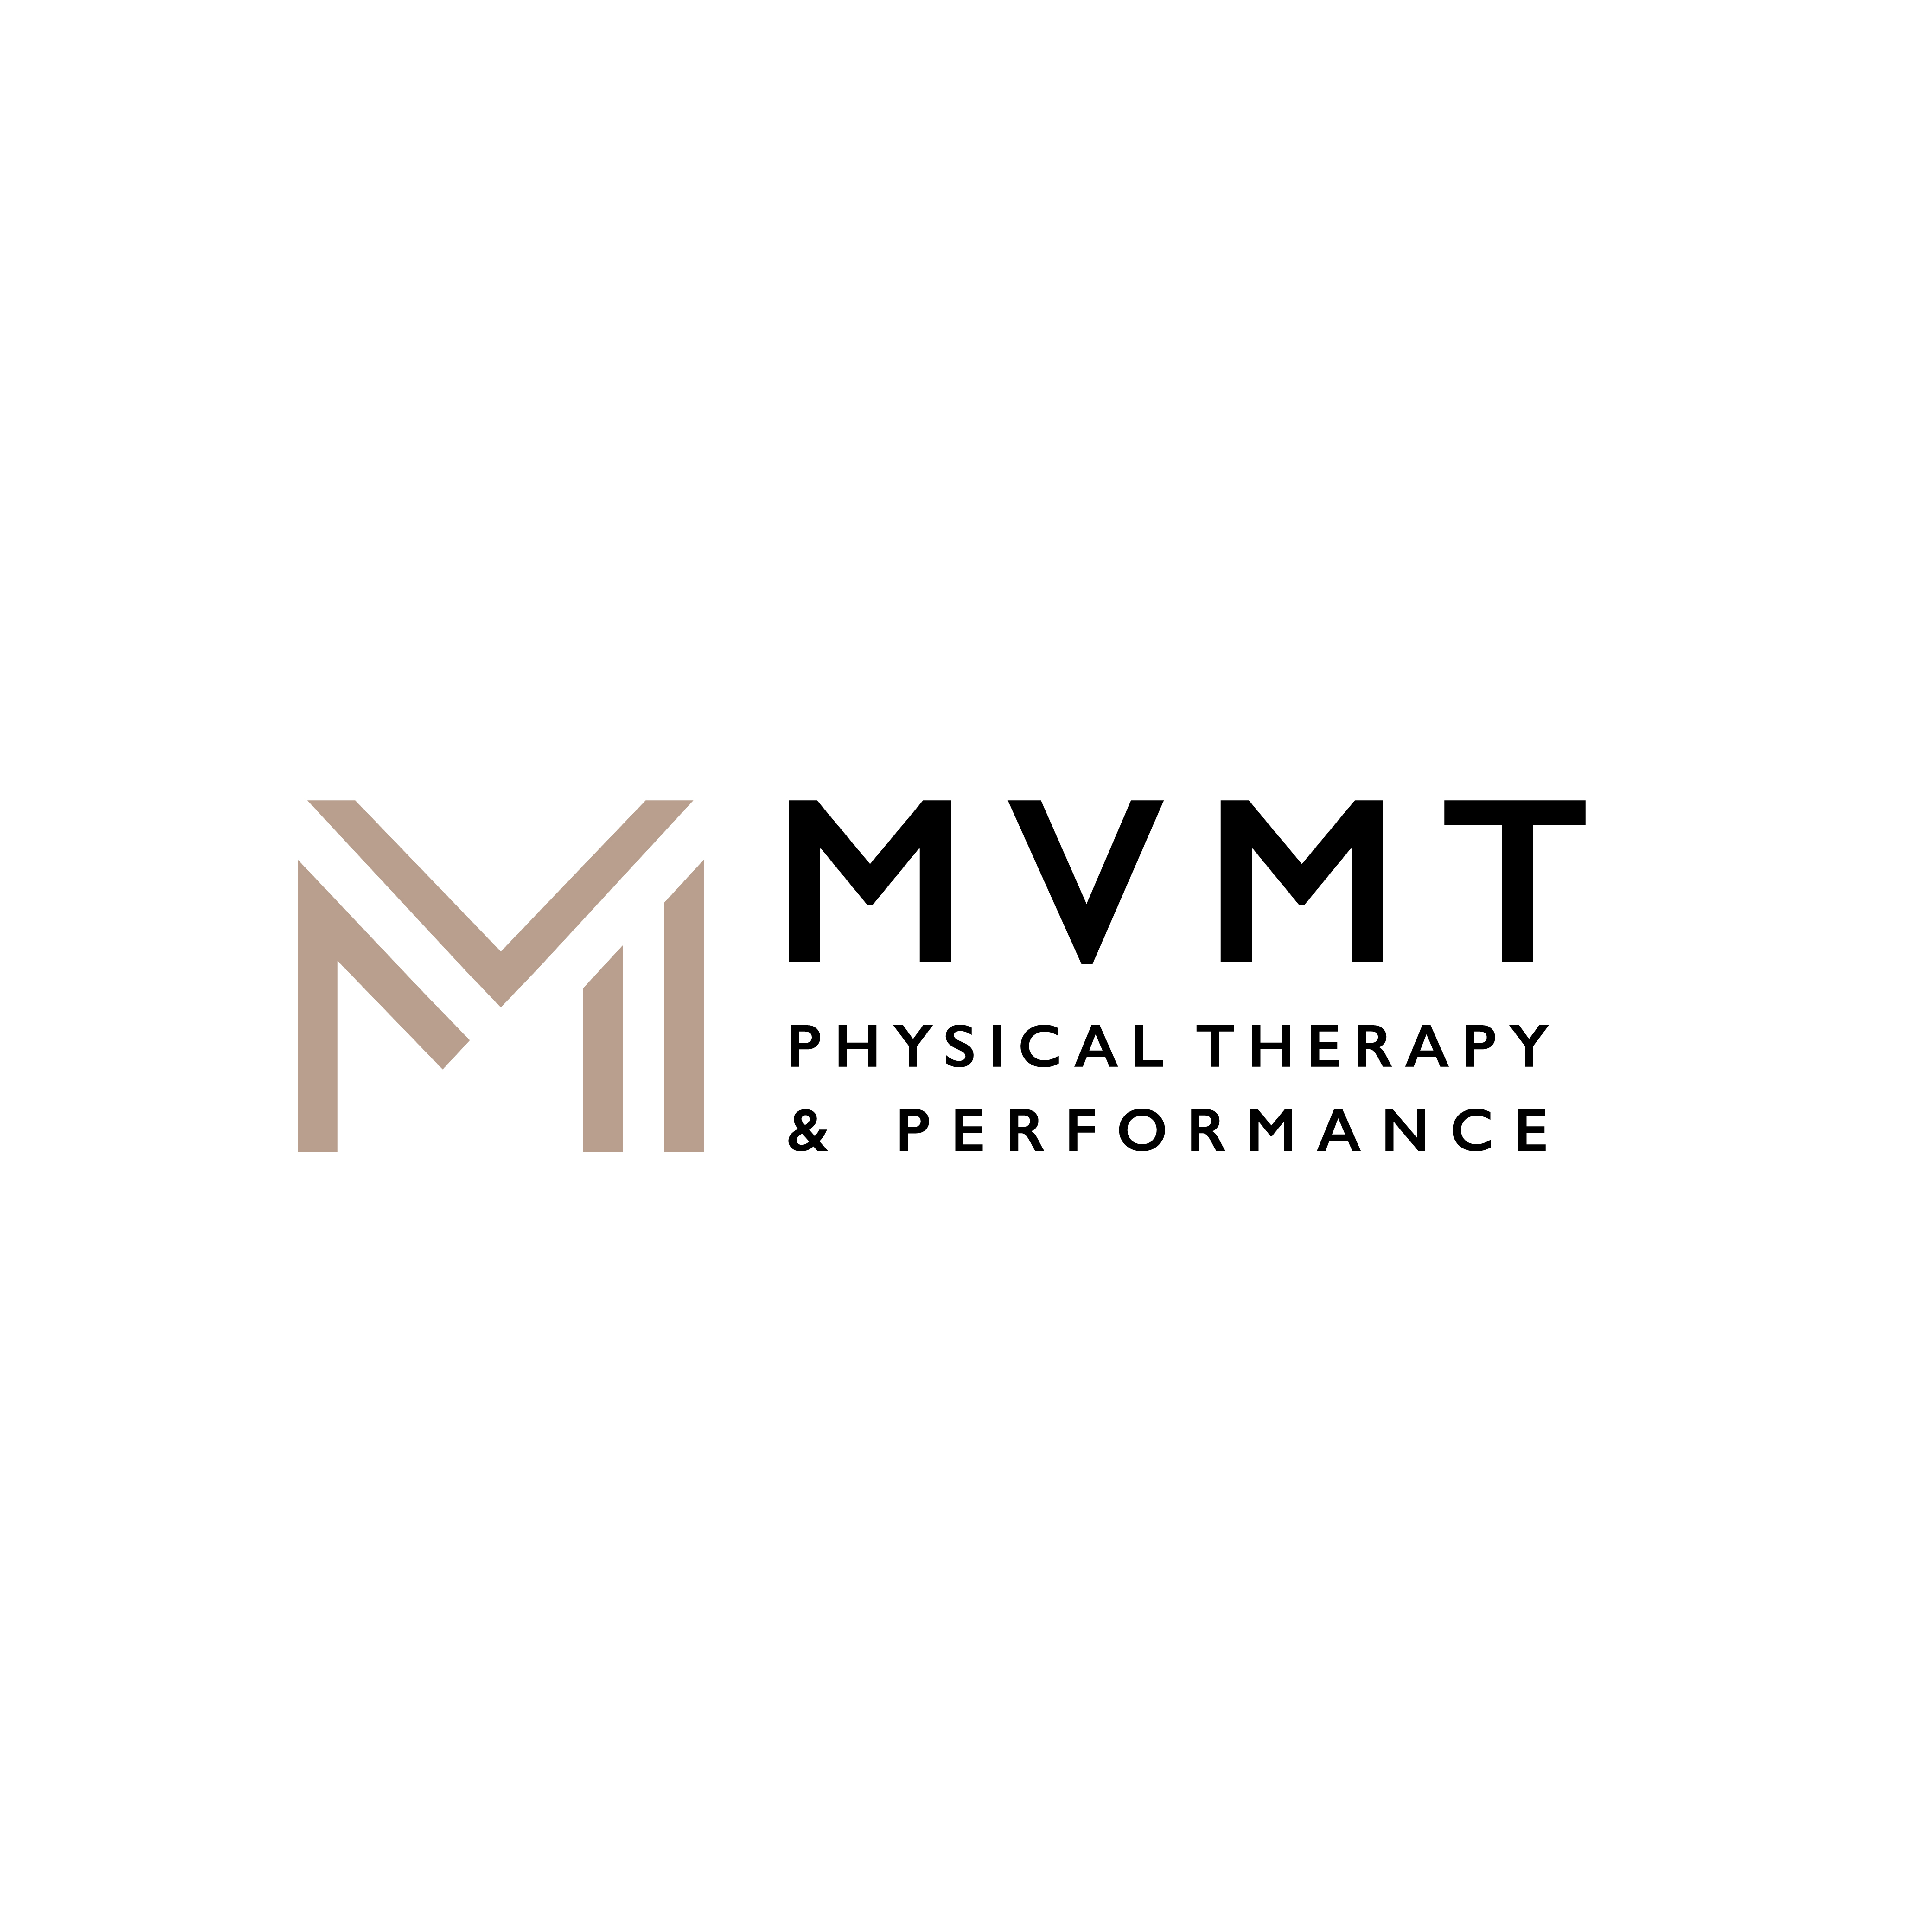 MVMT Physical Therapy & Performance